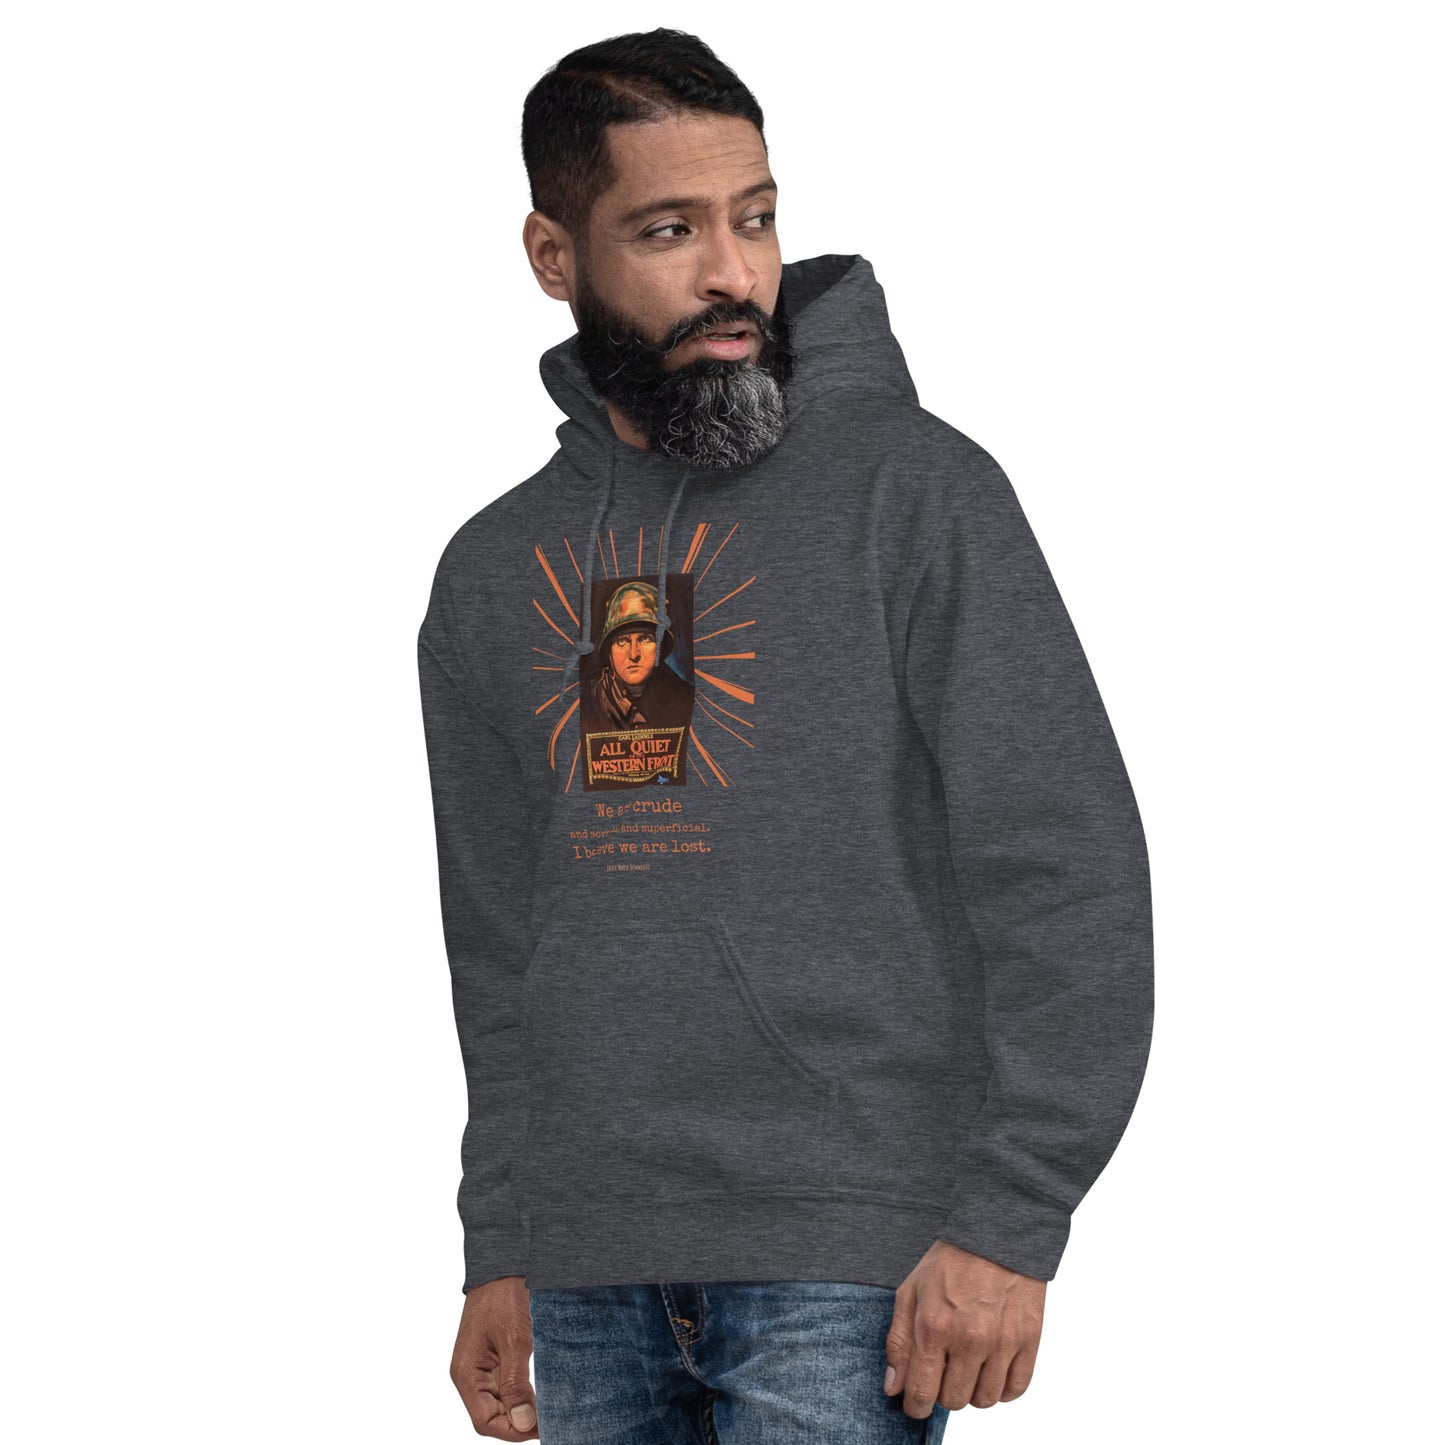 All Quiet on the Western Front Unisex Hoodie, 1930 Movie Poster, Erich Maria Remarque Quote